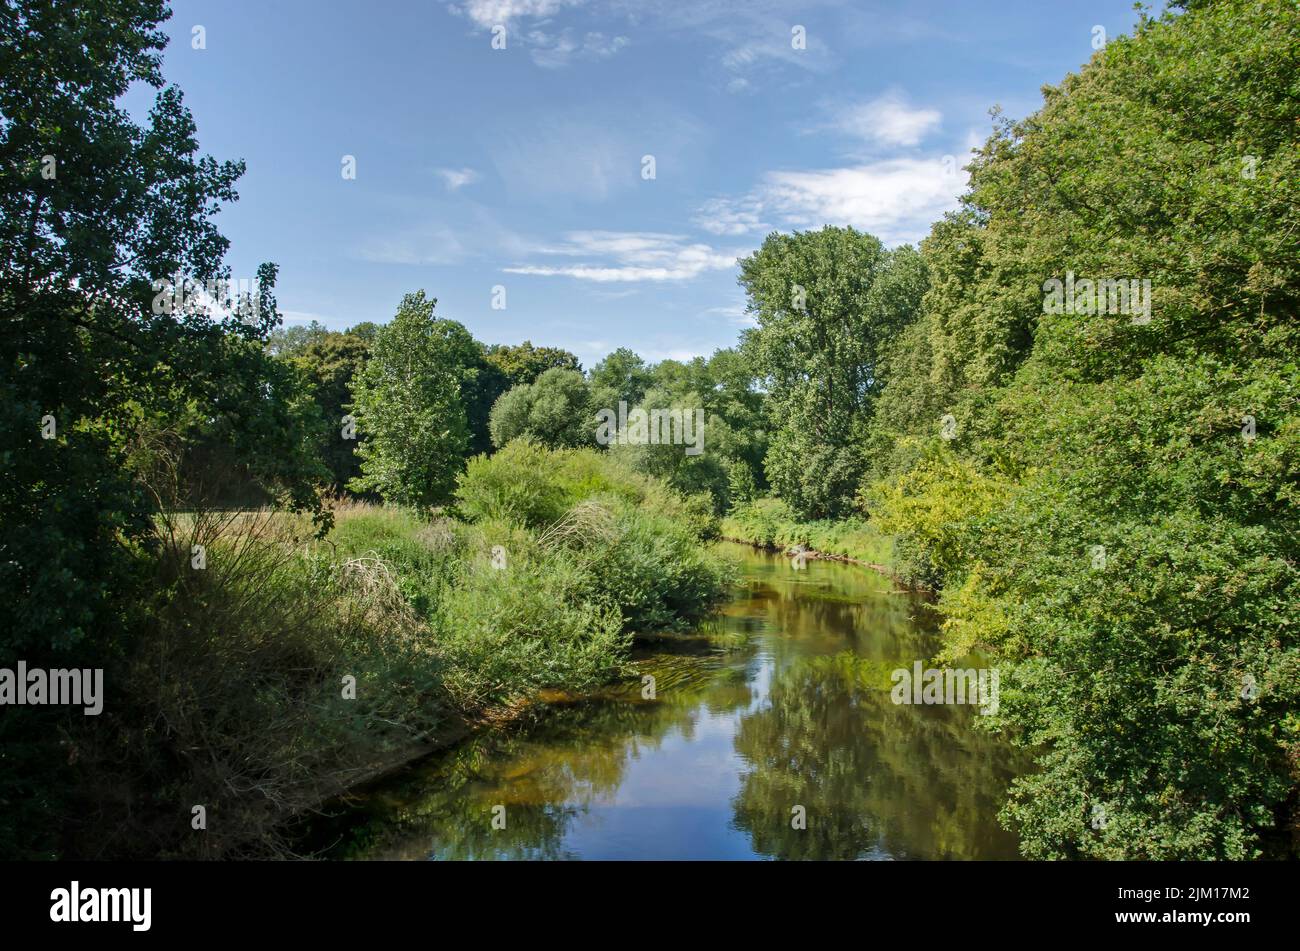 View along the tranquil stream of the river Ems in a lush and green landscape near Münster, Germany, on a summer day Stock Photo